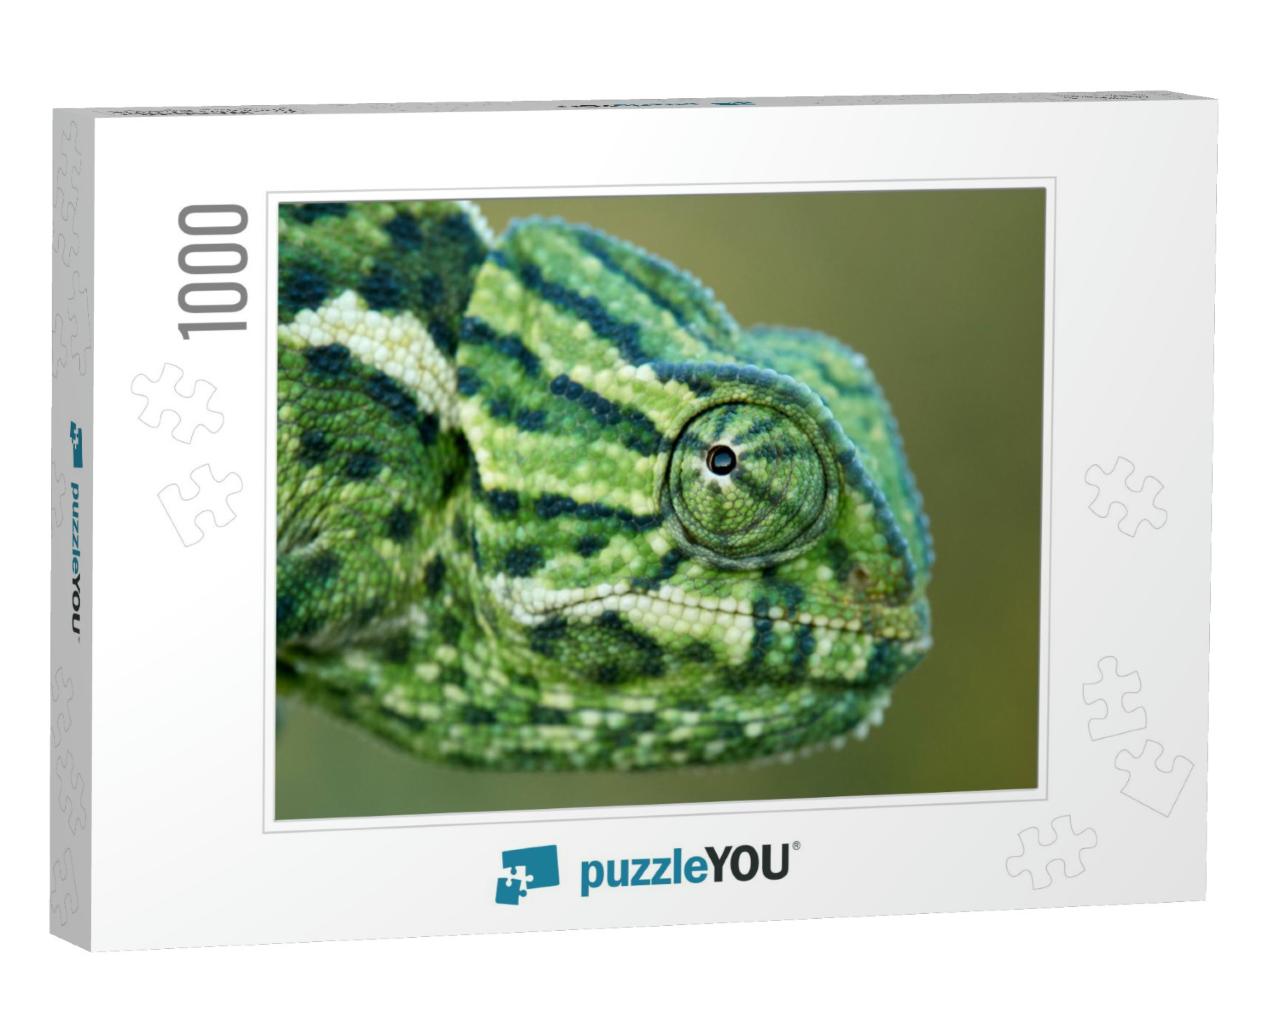 A Chameleon in a Natural Environment. Chamaeleo Chameleon... Jigsaw Puzzle with 1000 pieces